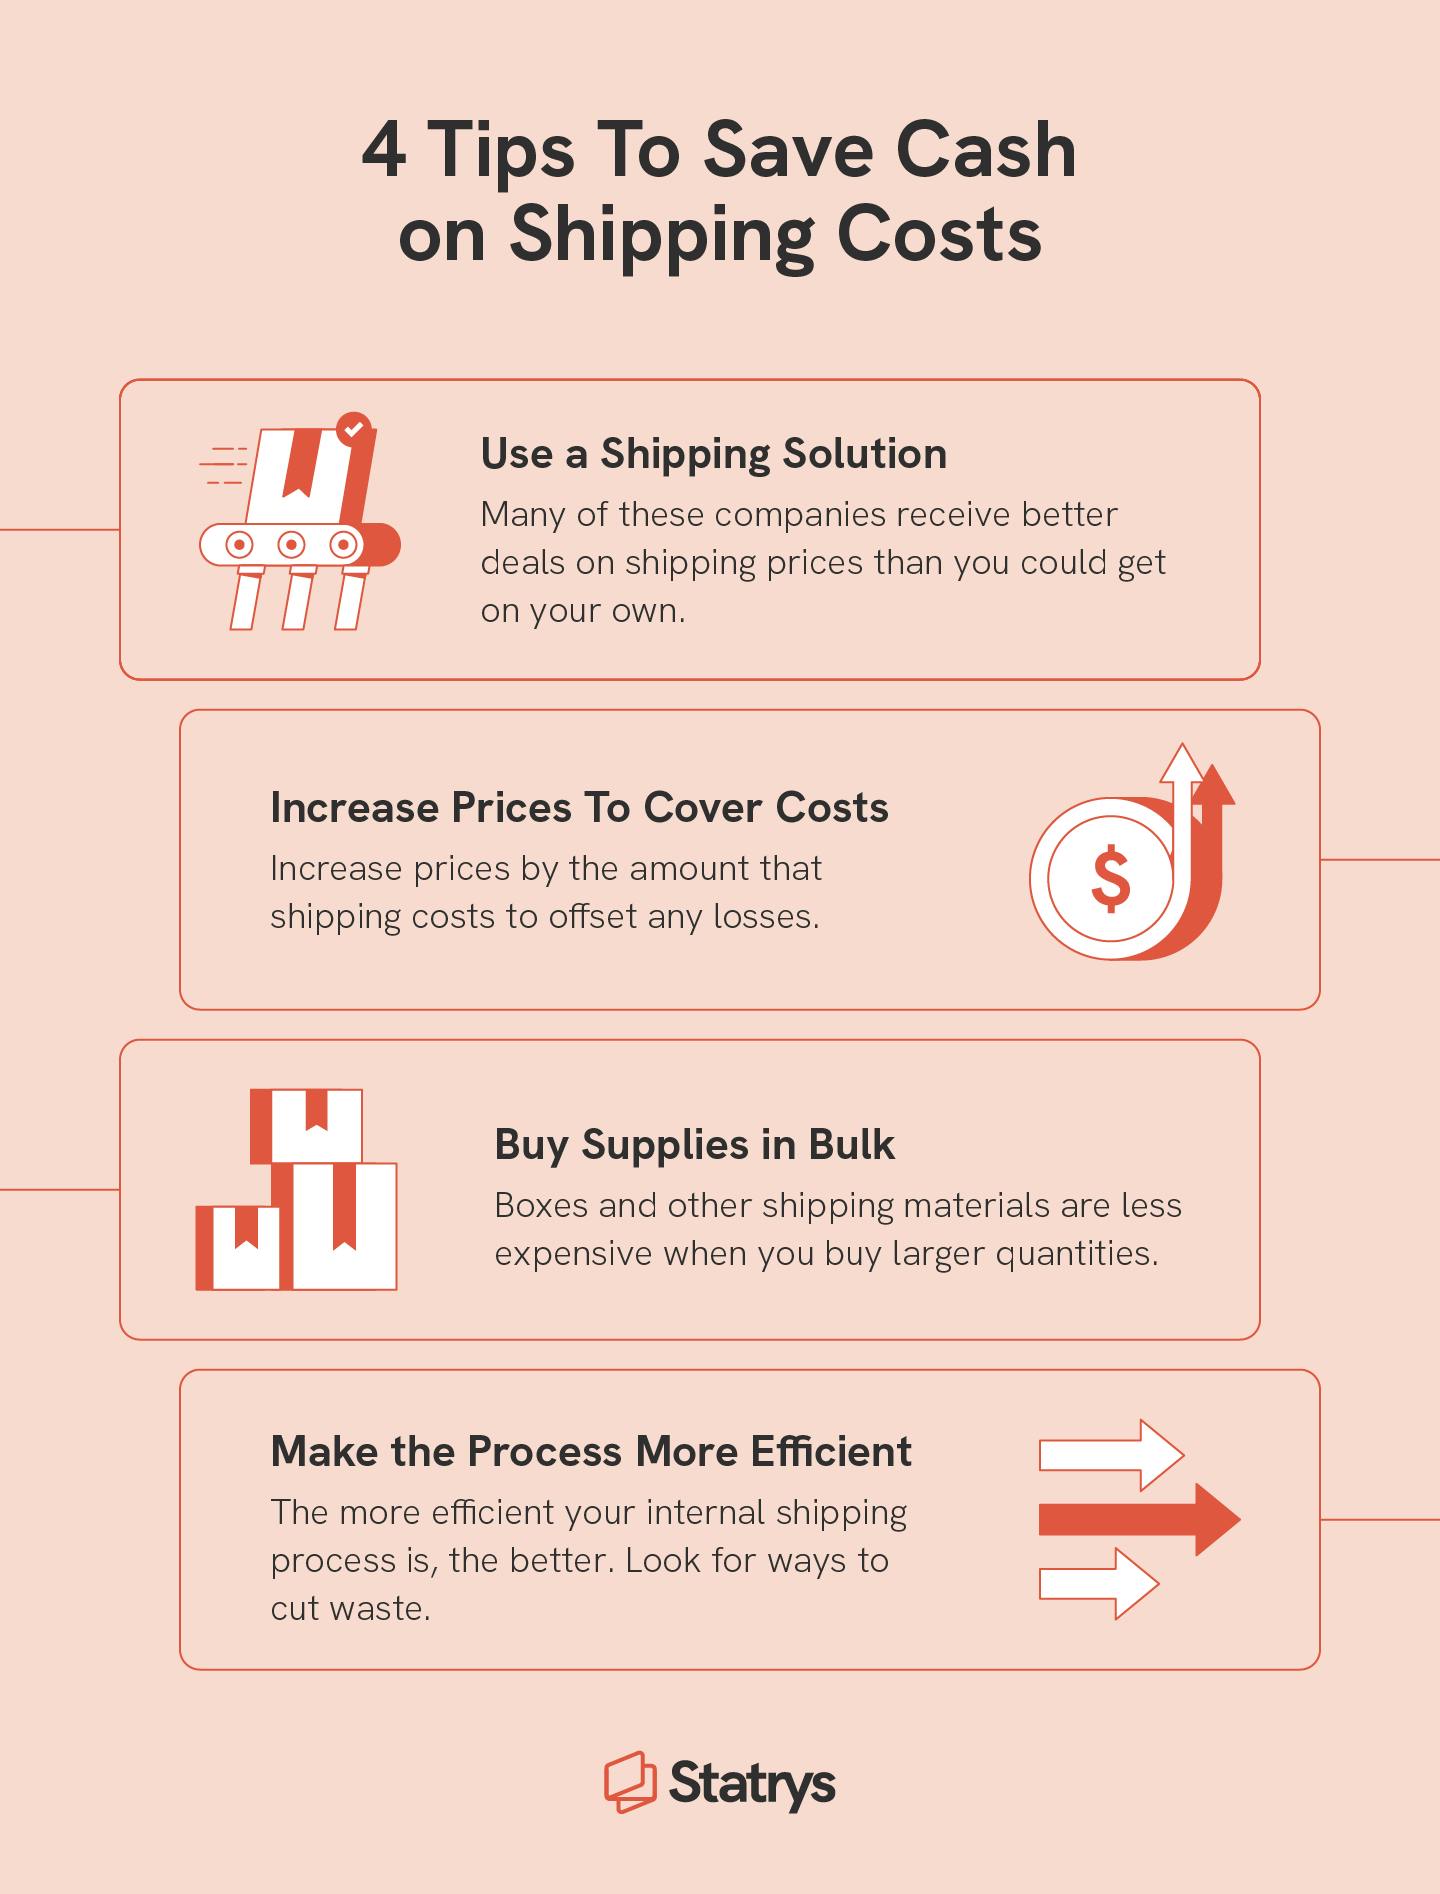 17 tips to reduce shipping costs on